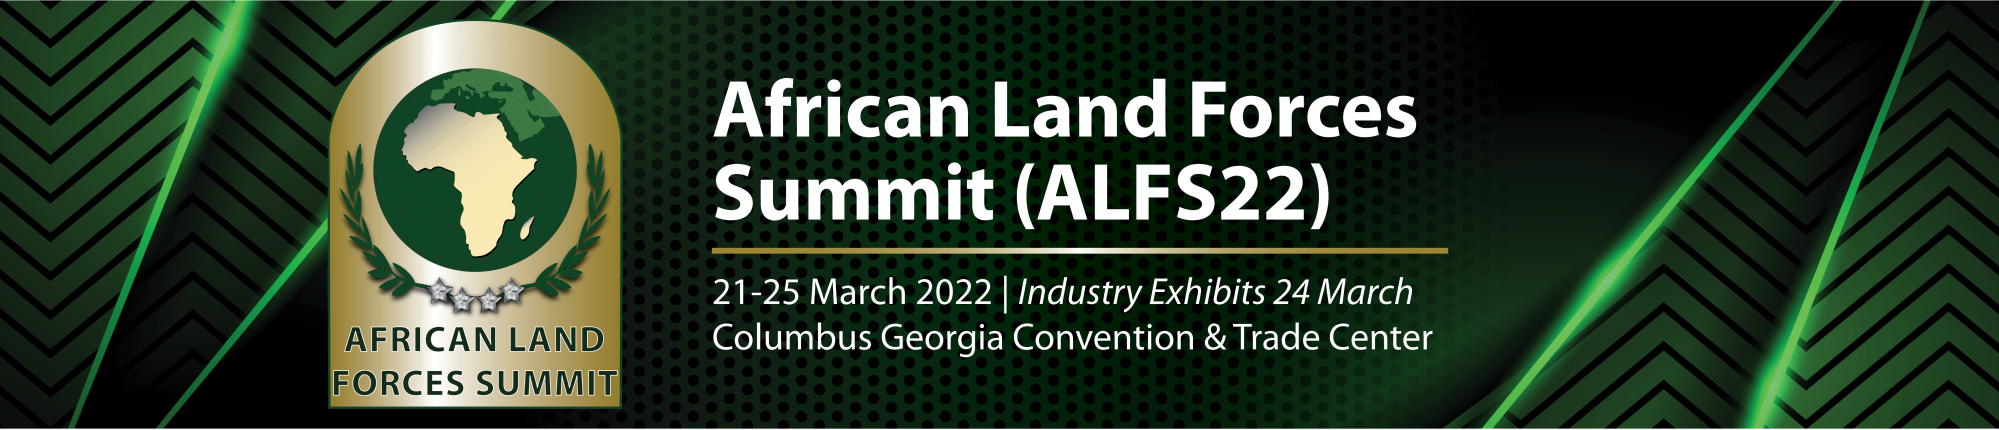 African Land Forces Summit (ALFS22)